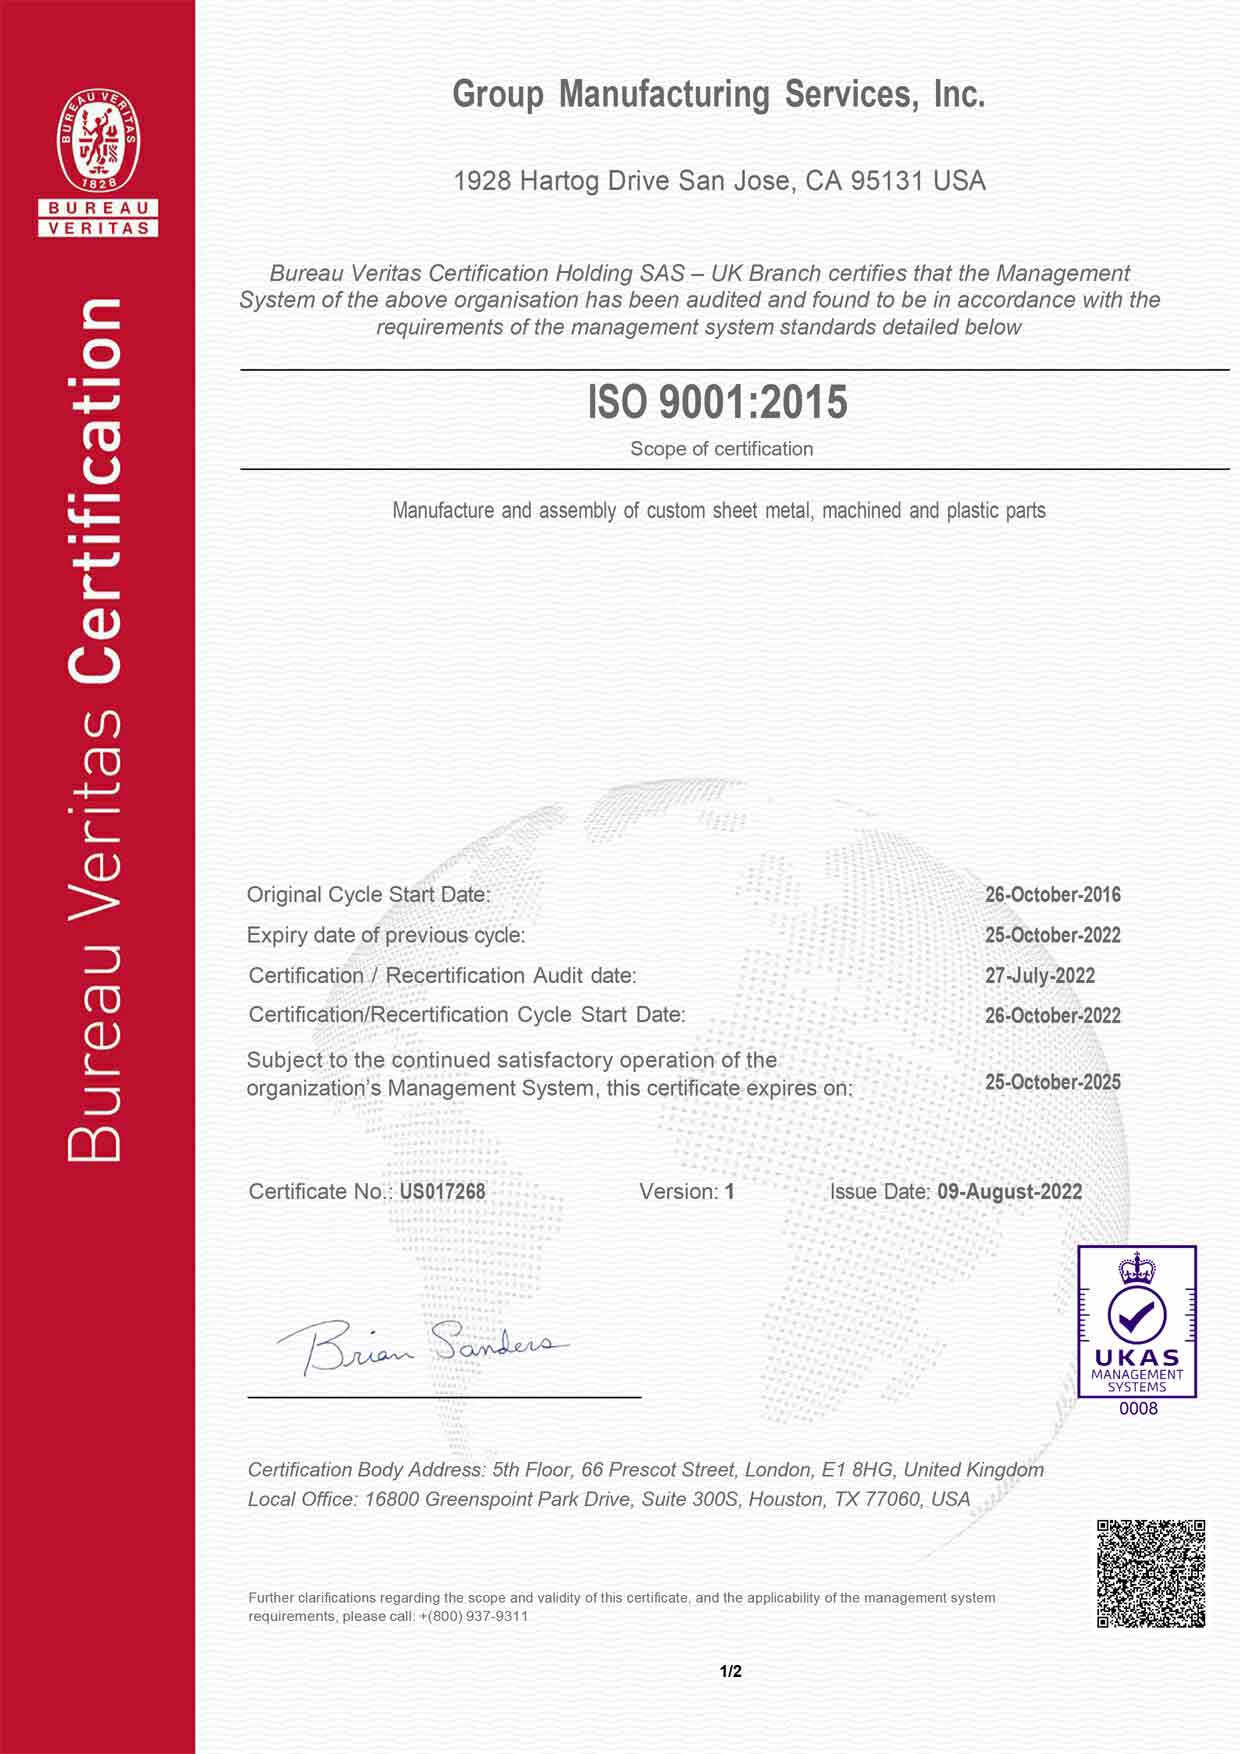 ISO 9001:2015 Certificate Image